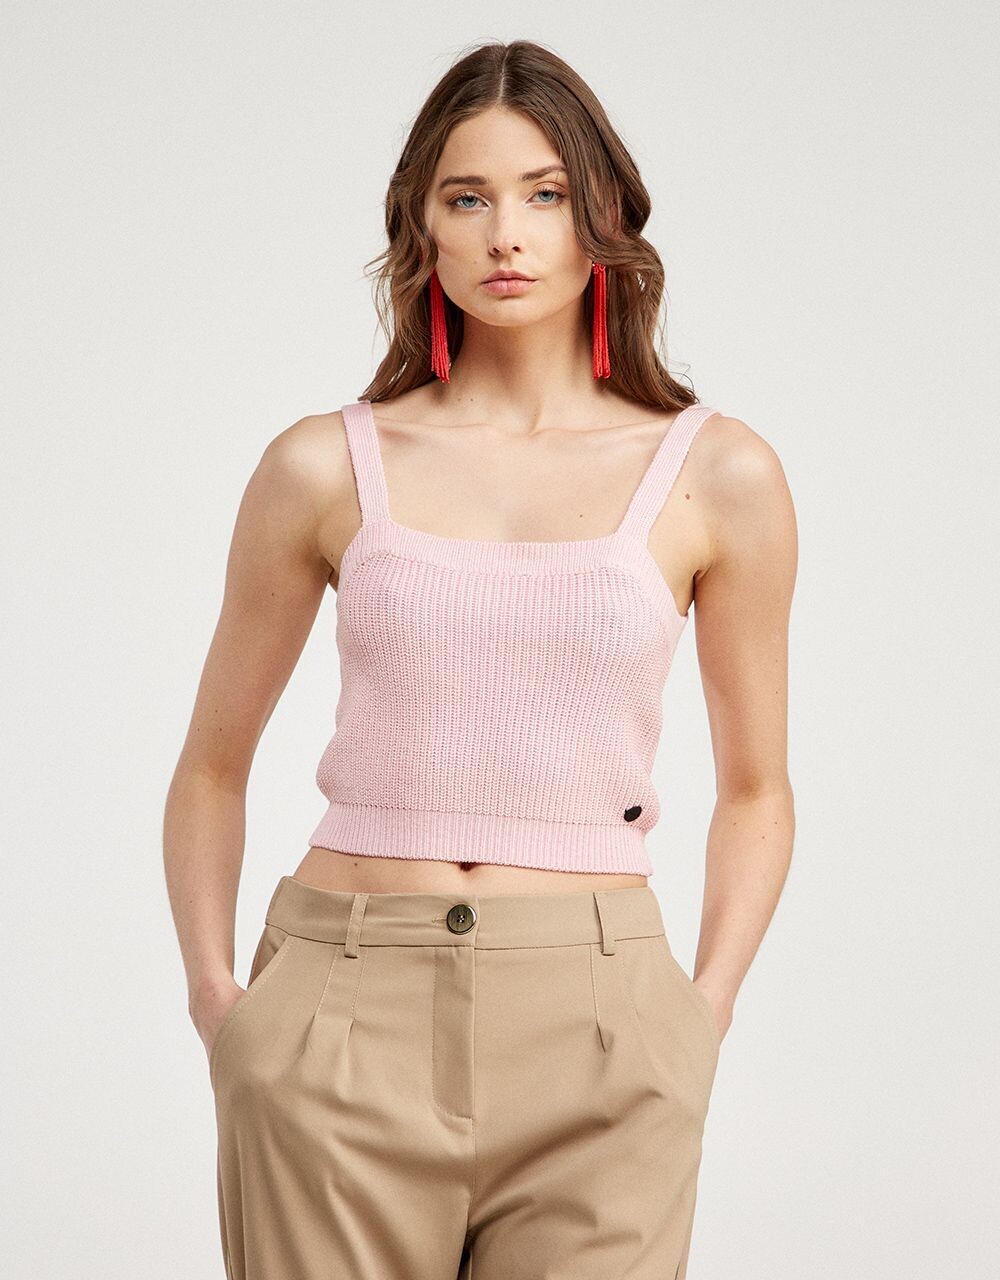 Top cropped in maglia